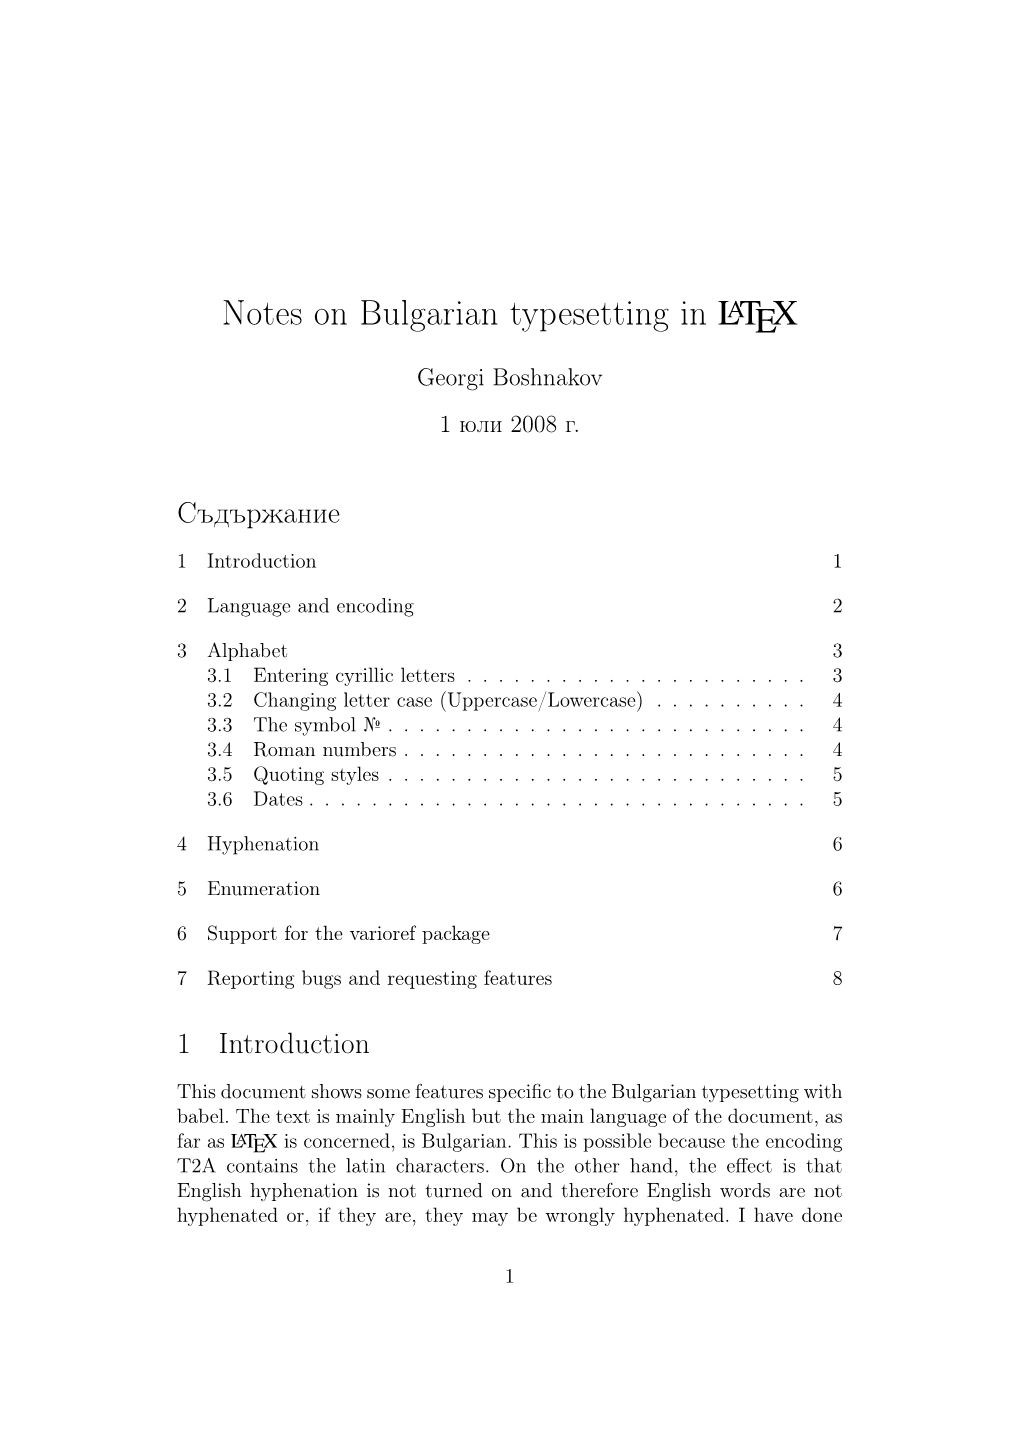 Notes on Bulgarian Typesetting in LATEX